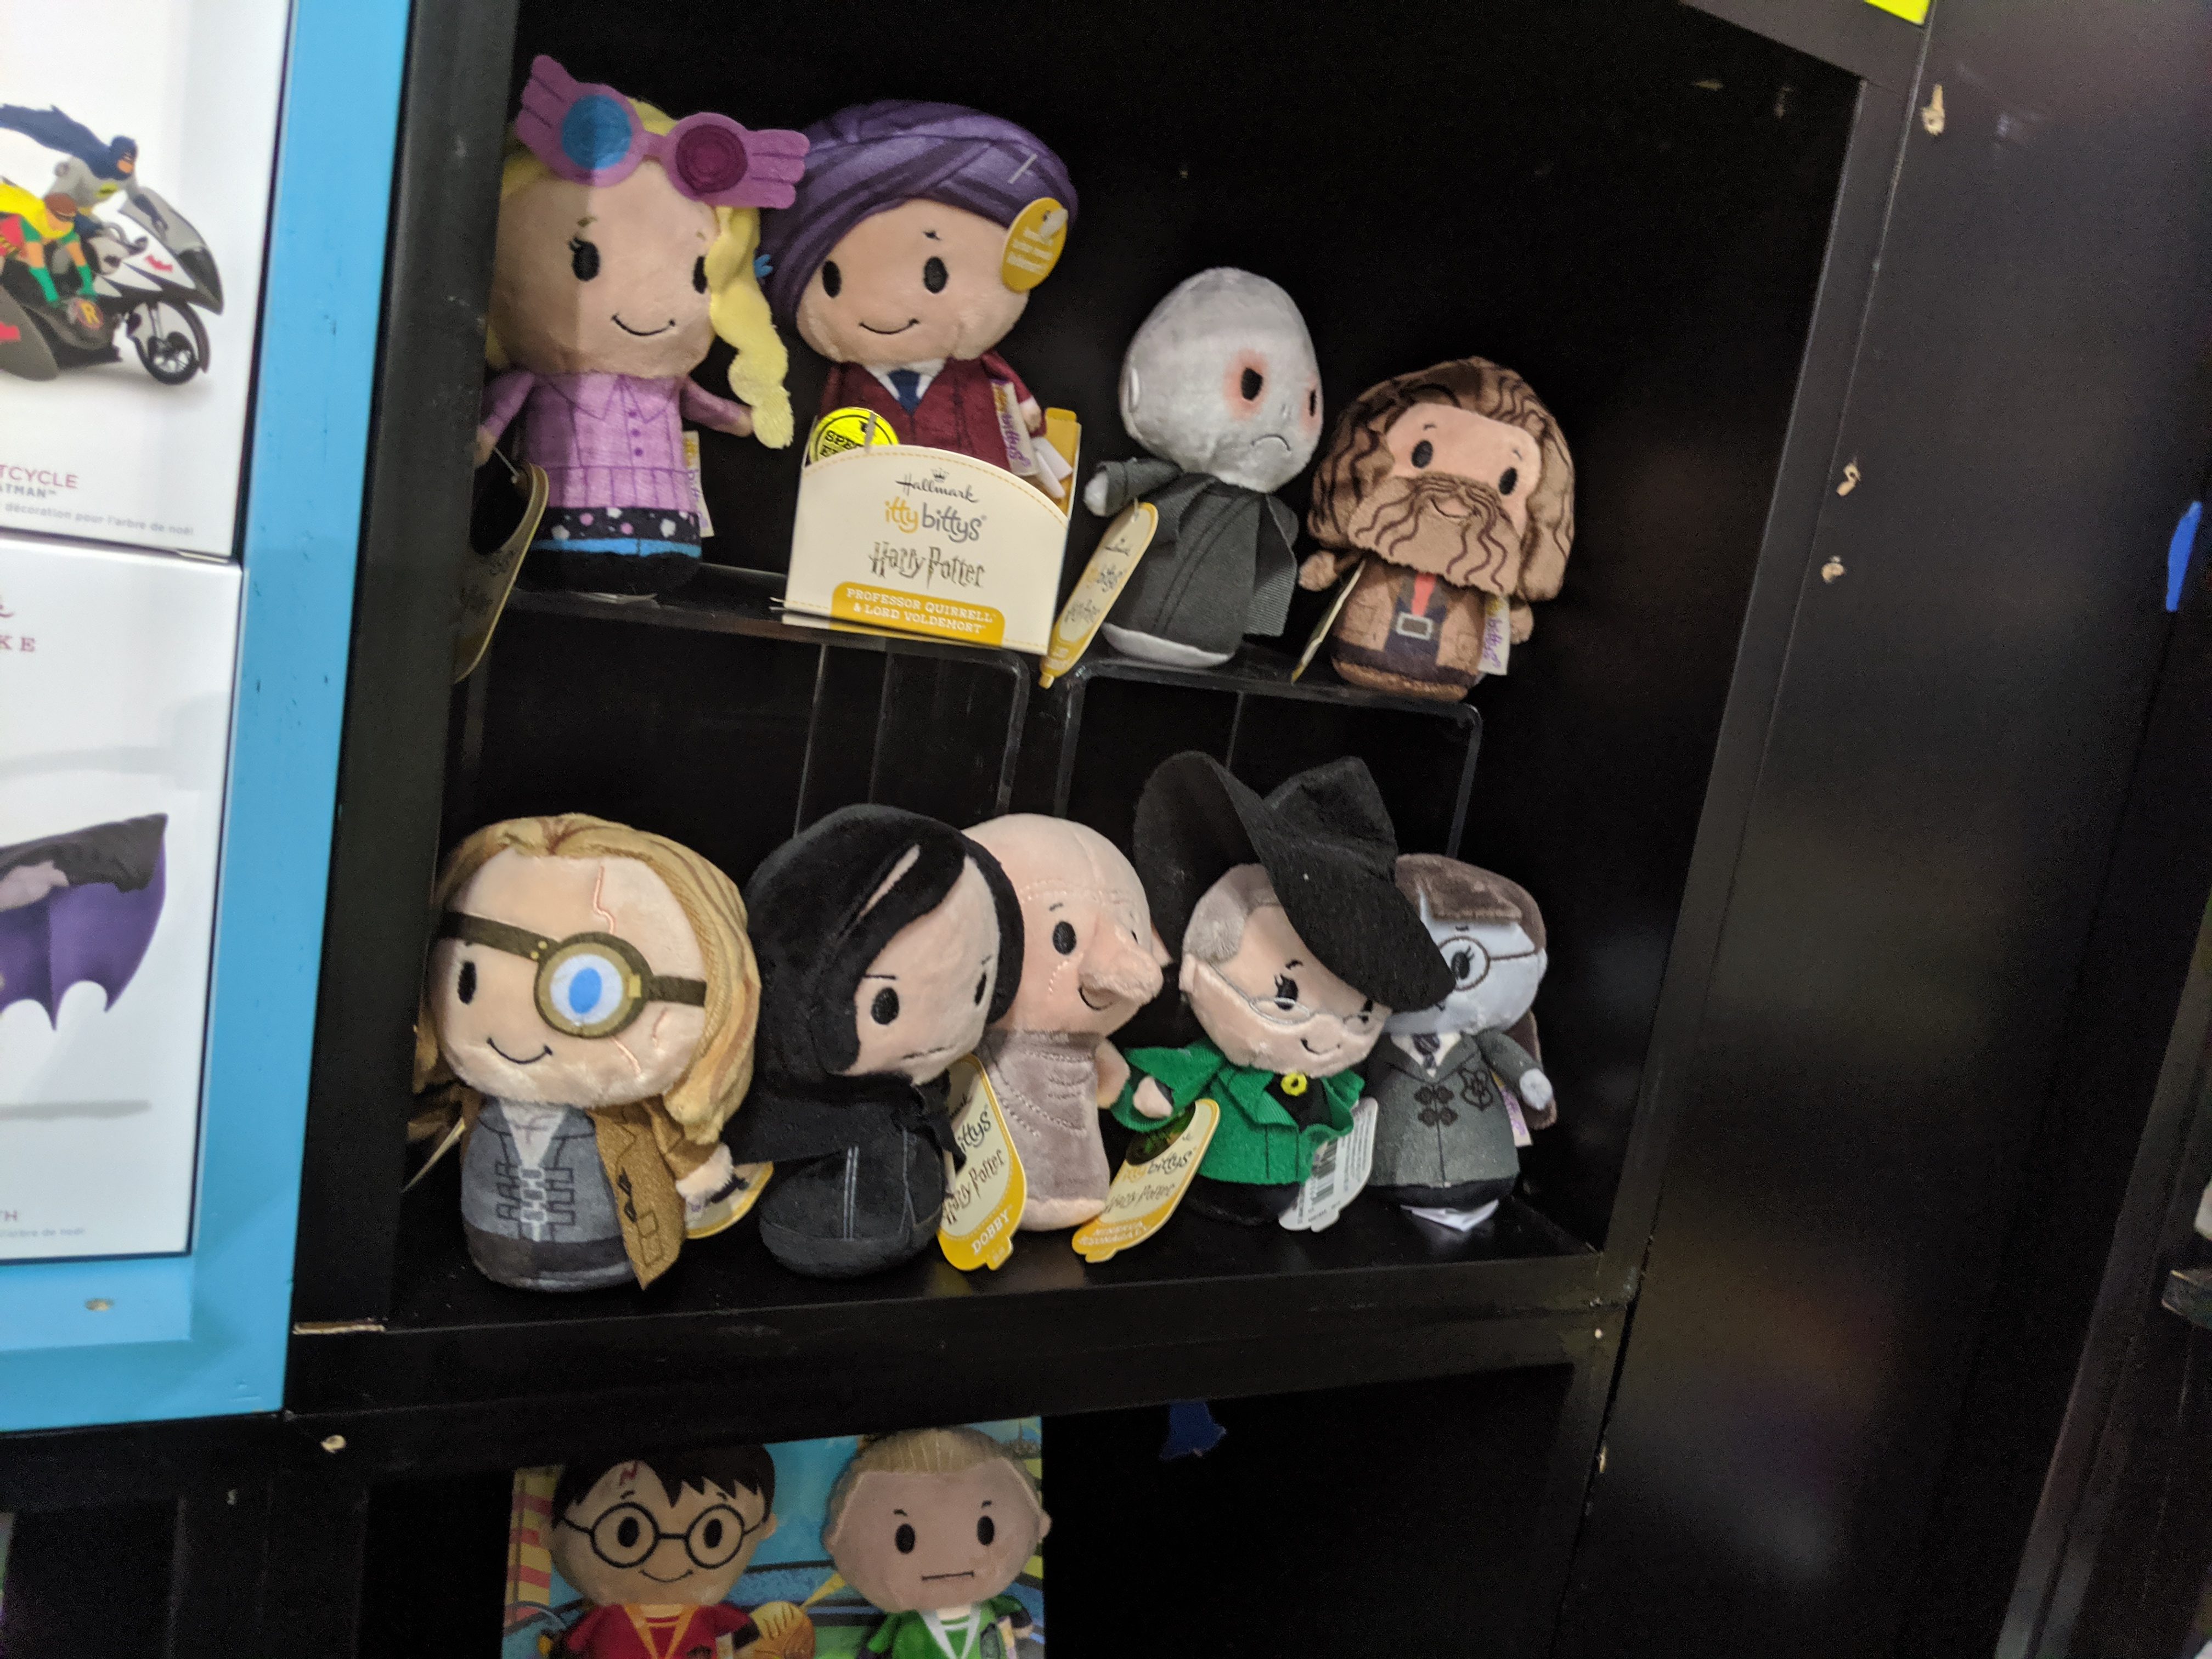 Check out these adorable “Harry Potter” itty bittys.